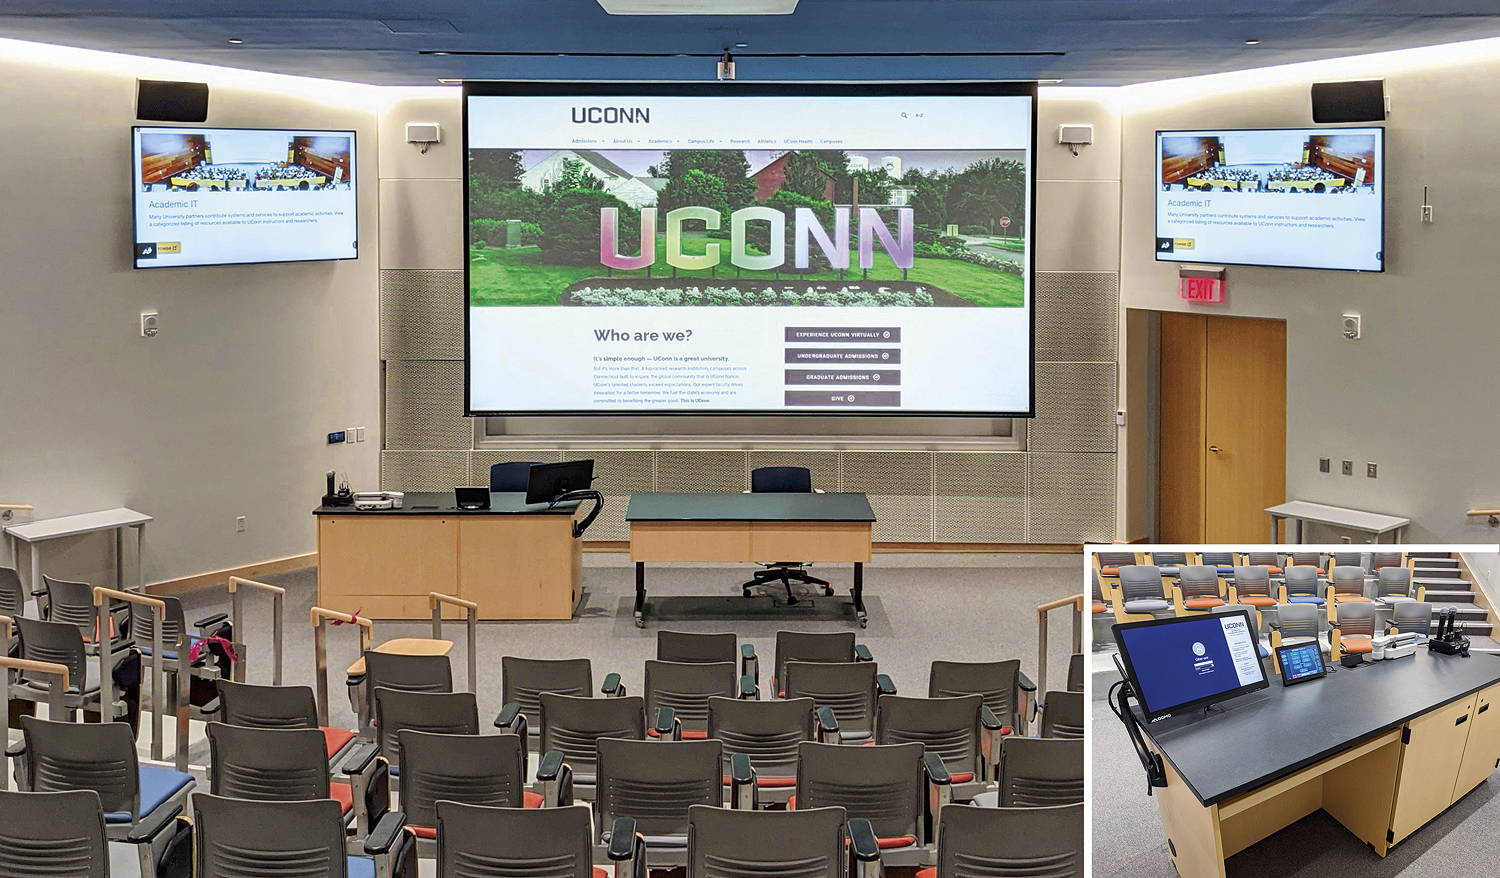 Gant Science Complex lecture hall has a ceiling projector and two flat panel displays. Inset shows the teaching station.